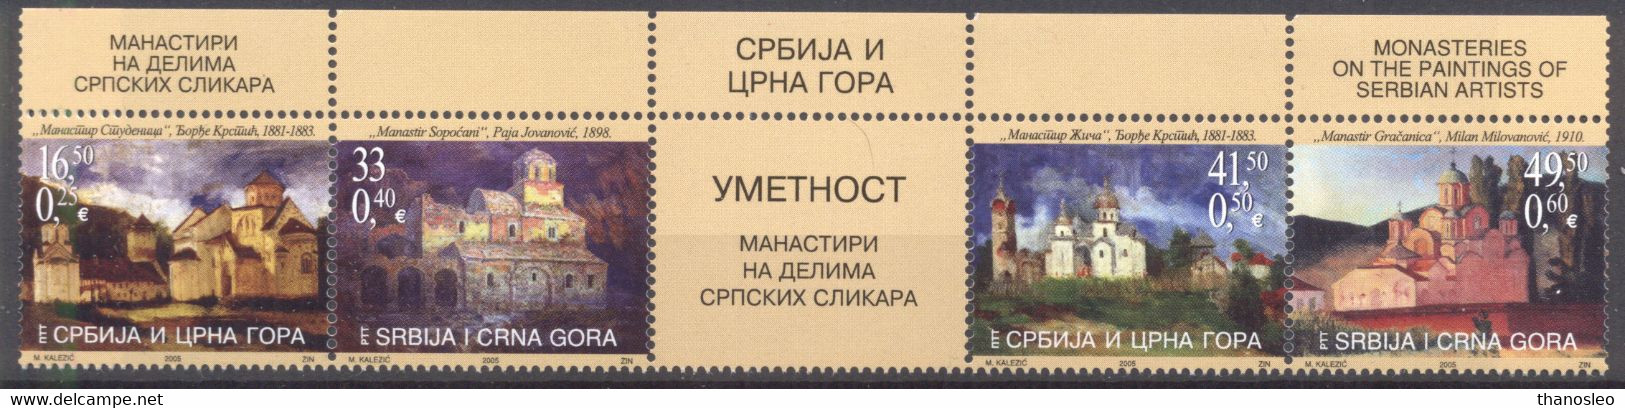 Serbia And Montenegro 2005 Paintings Of Monasteries MNH VF - Serbia